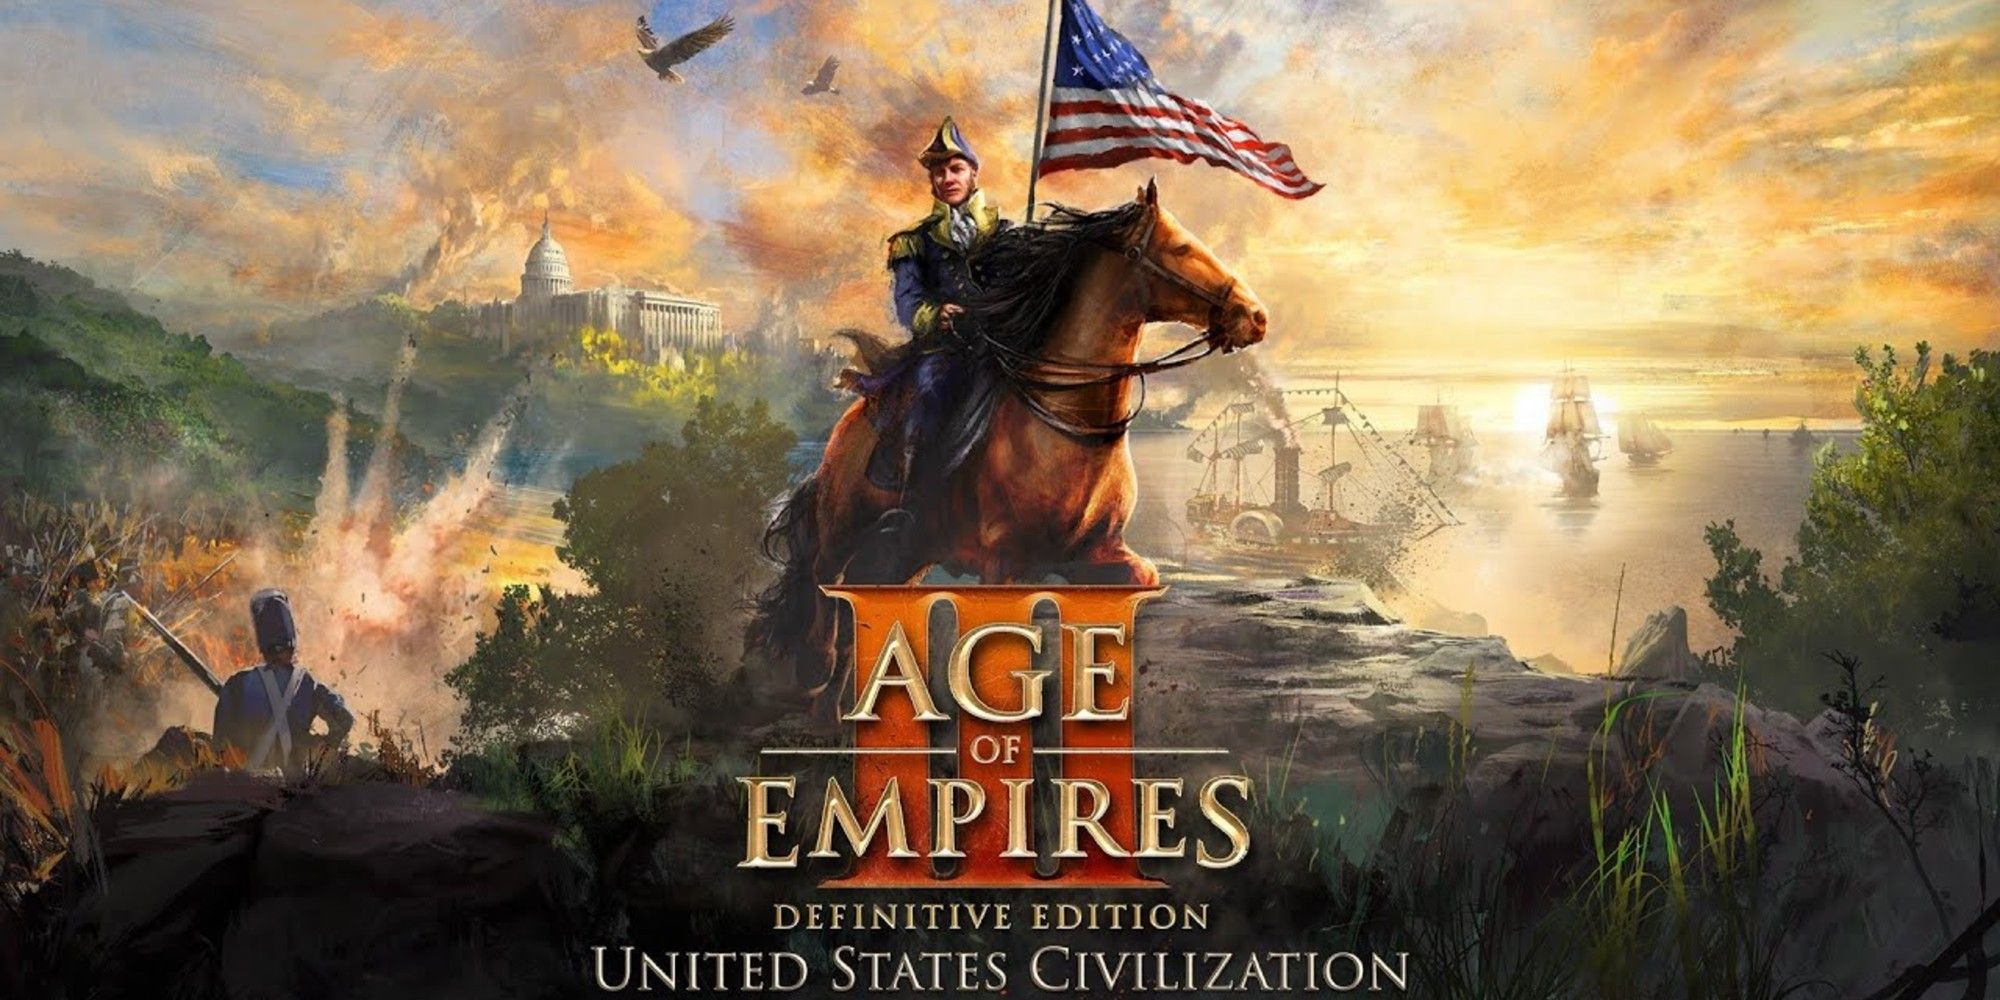 age of empires 3